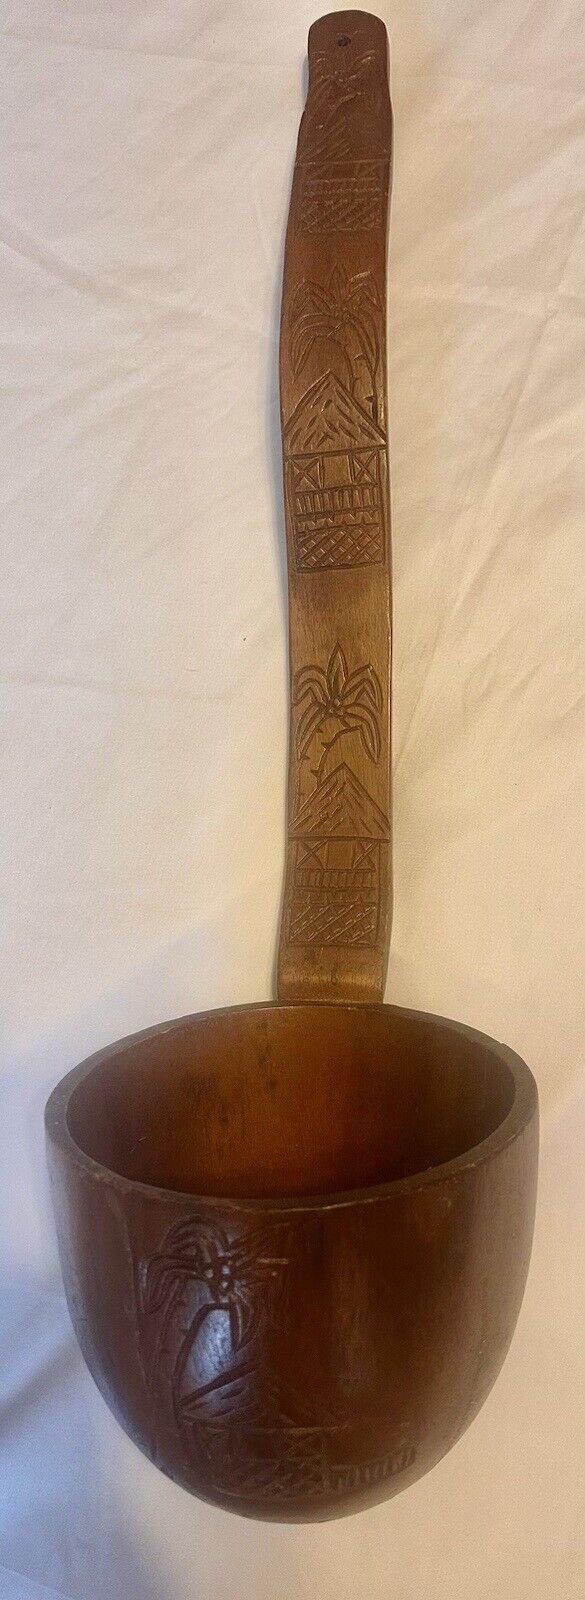 Vintage Giant African Hand Carved Wood Ladle Ceremonial Spoon Hut Palm Tree